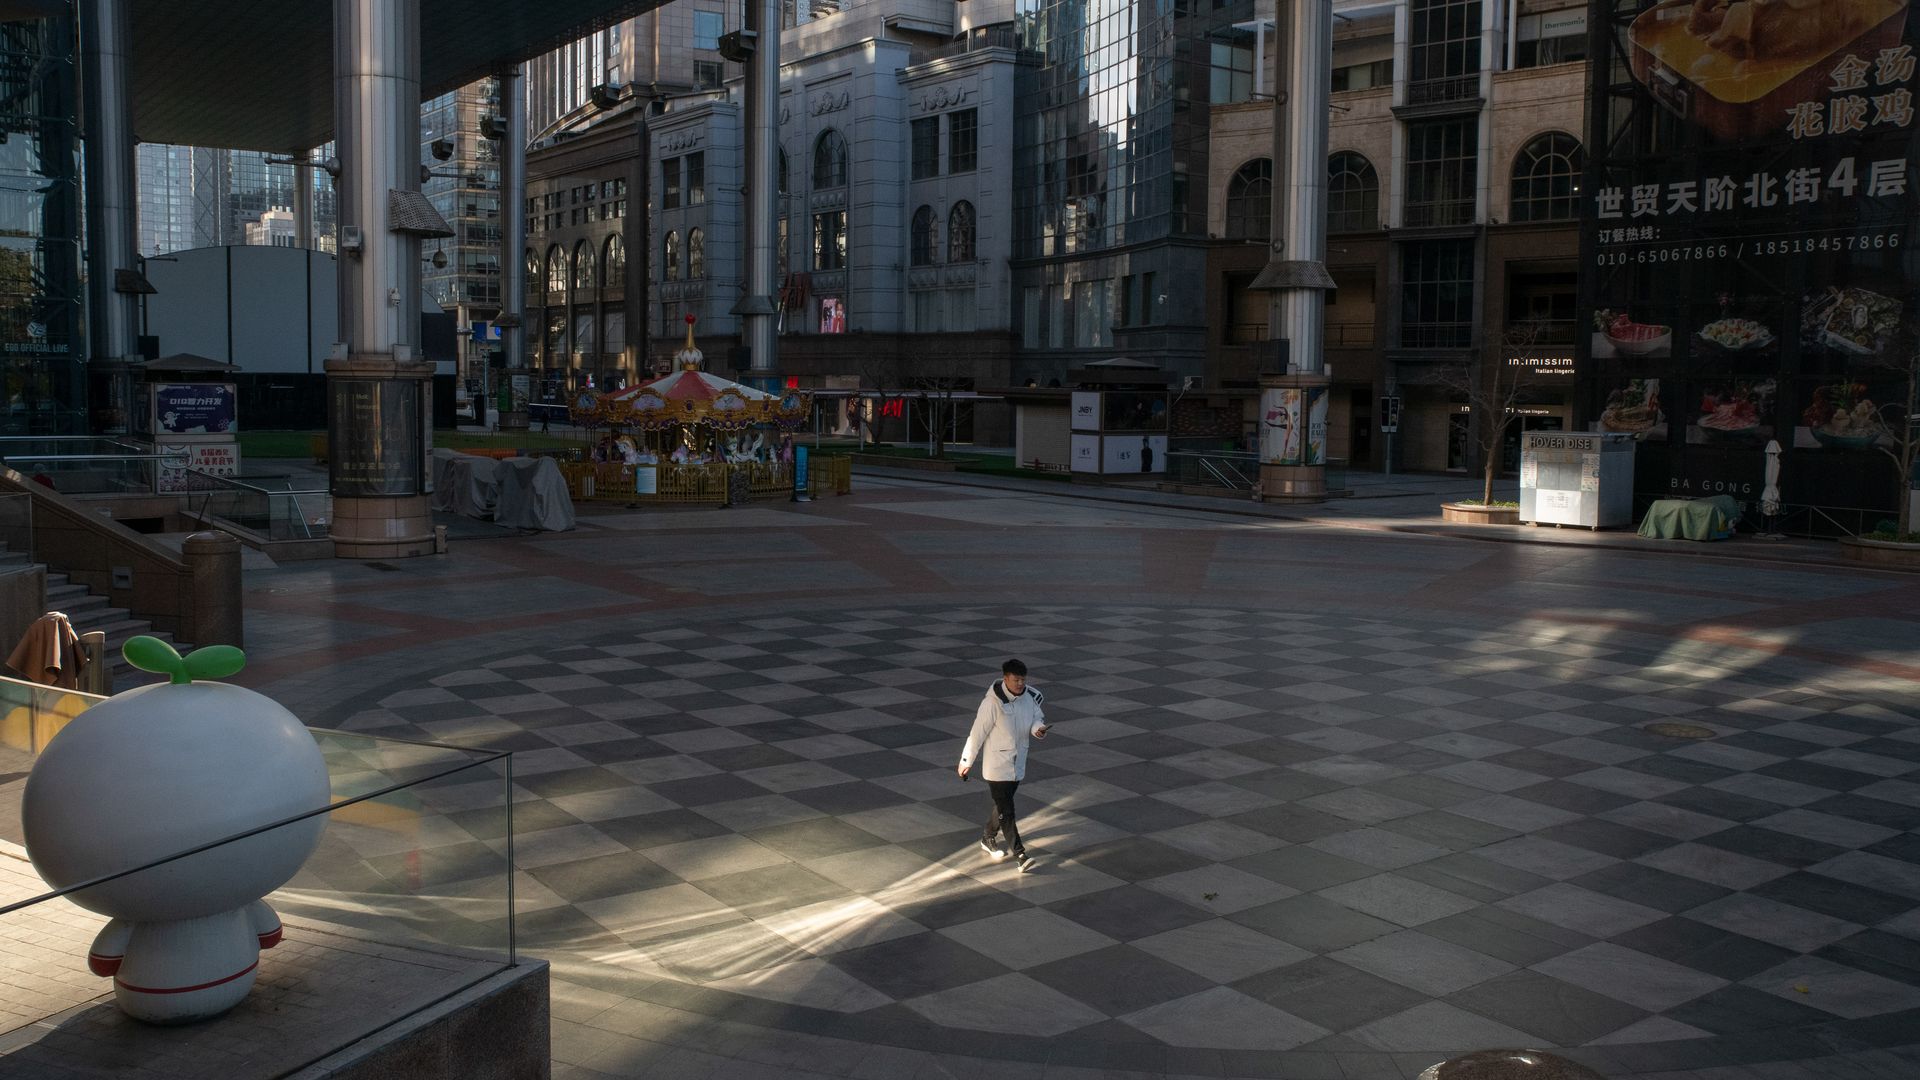 A near-deserted pedestrian mall in Beijing, China, on Saturday, Nov. 26, 2022.